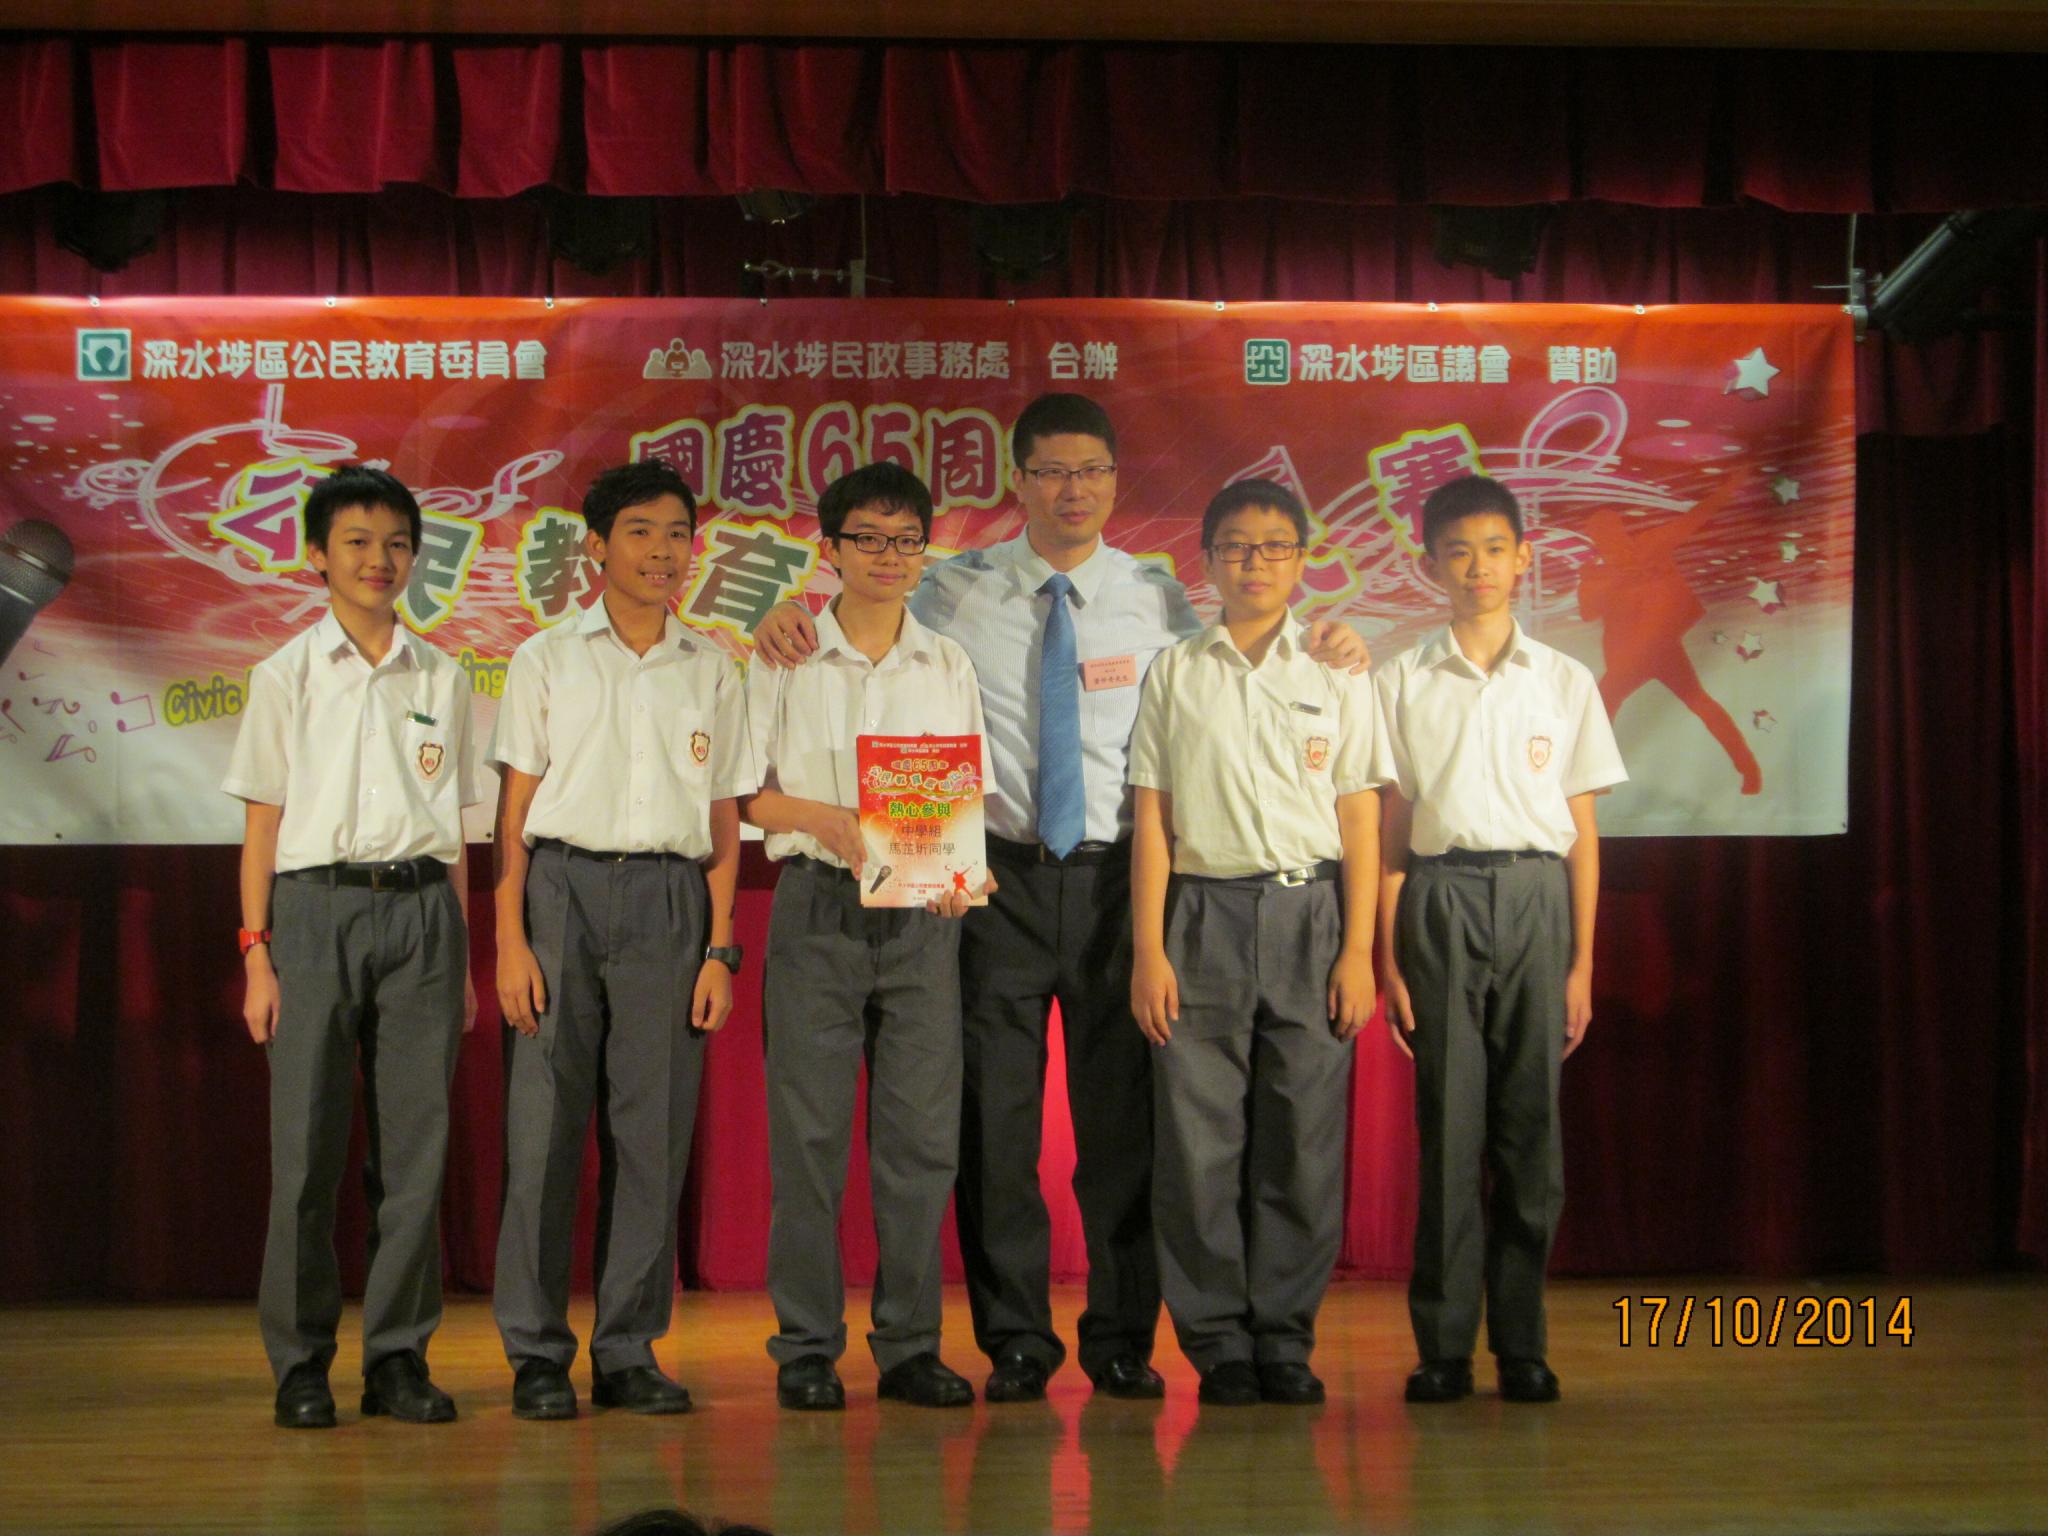 Student representatives received certificates from our Principal, who is also the Vice-Chairperson of the Sham Shui Po Civic Education Committee.